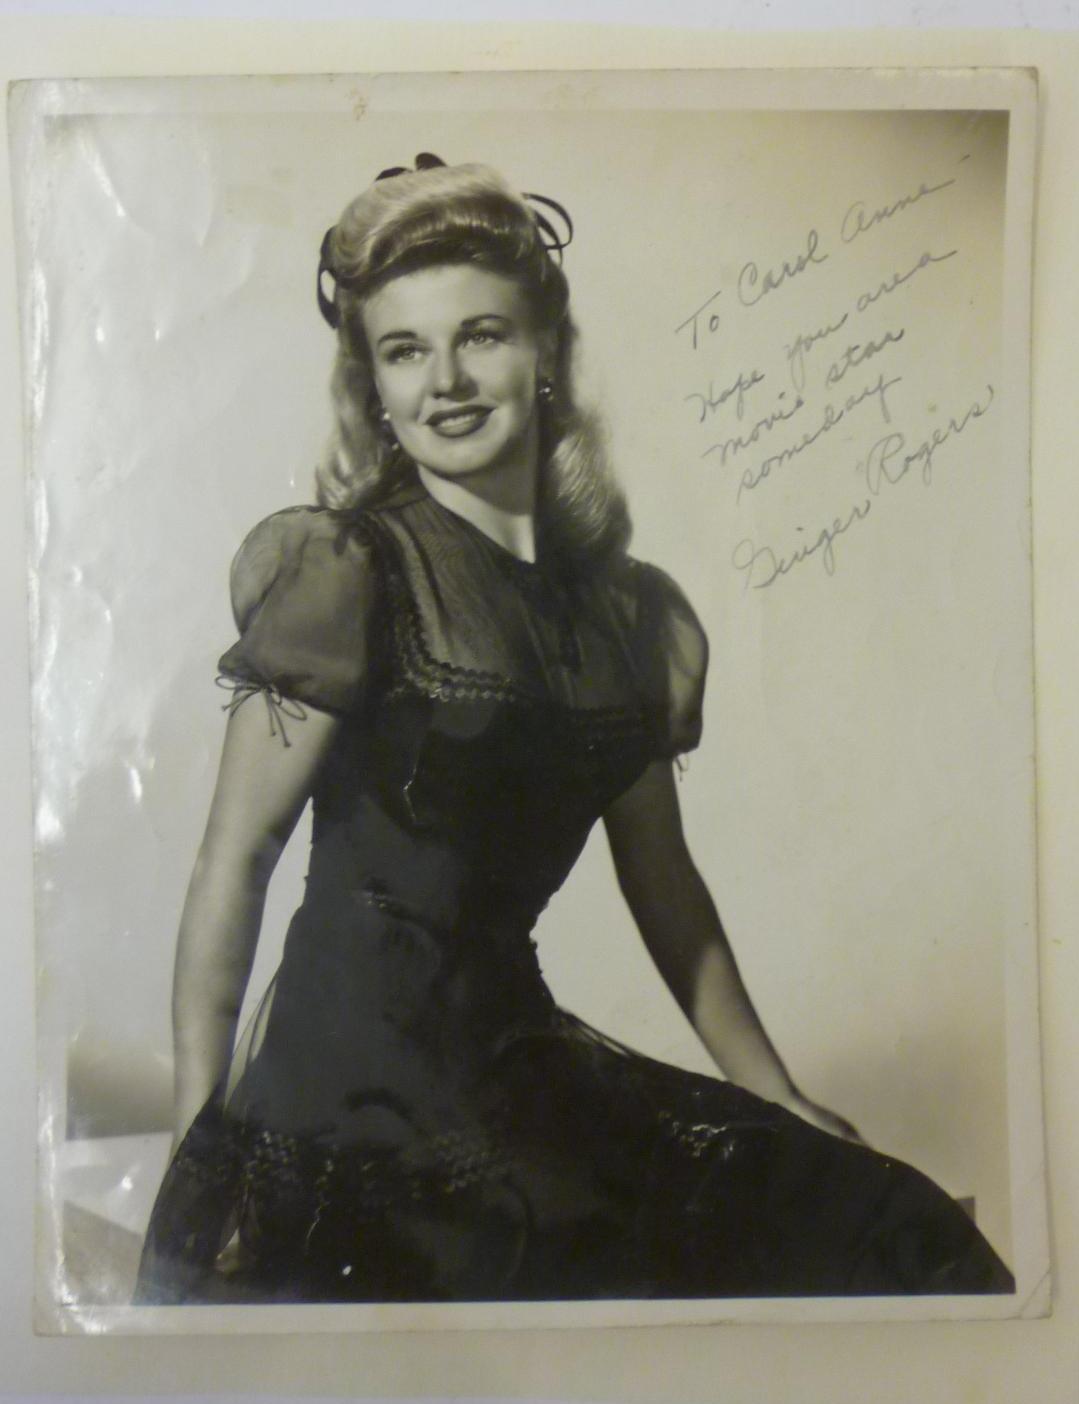 A collection of autographed photographs of stage and screen stars including Twiggy, Ginger Rogers, - Image 2 of 2